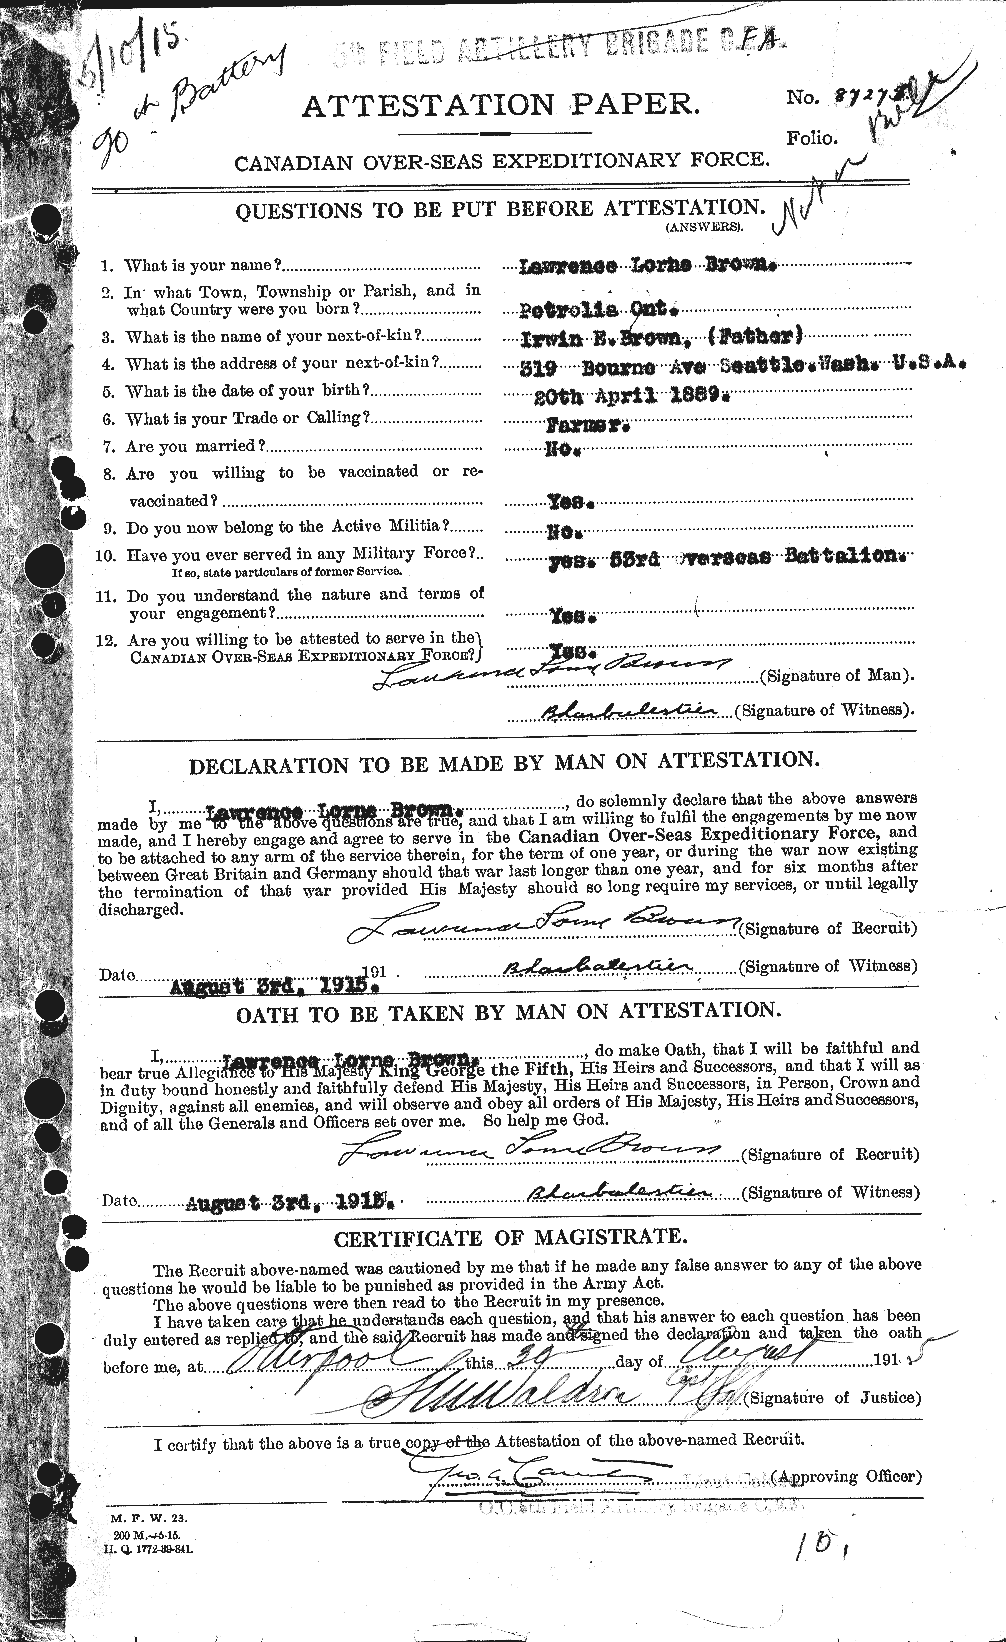 Personnel Records of the First World War - CEF 266270a